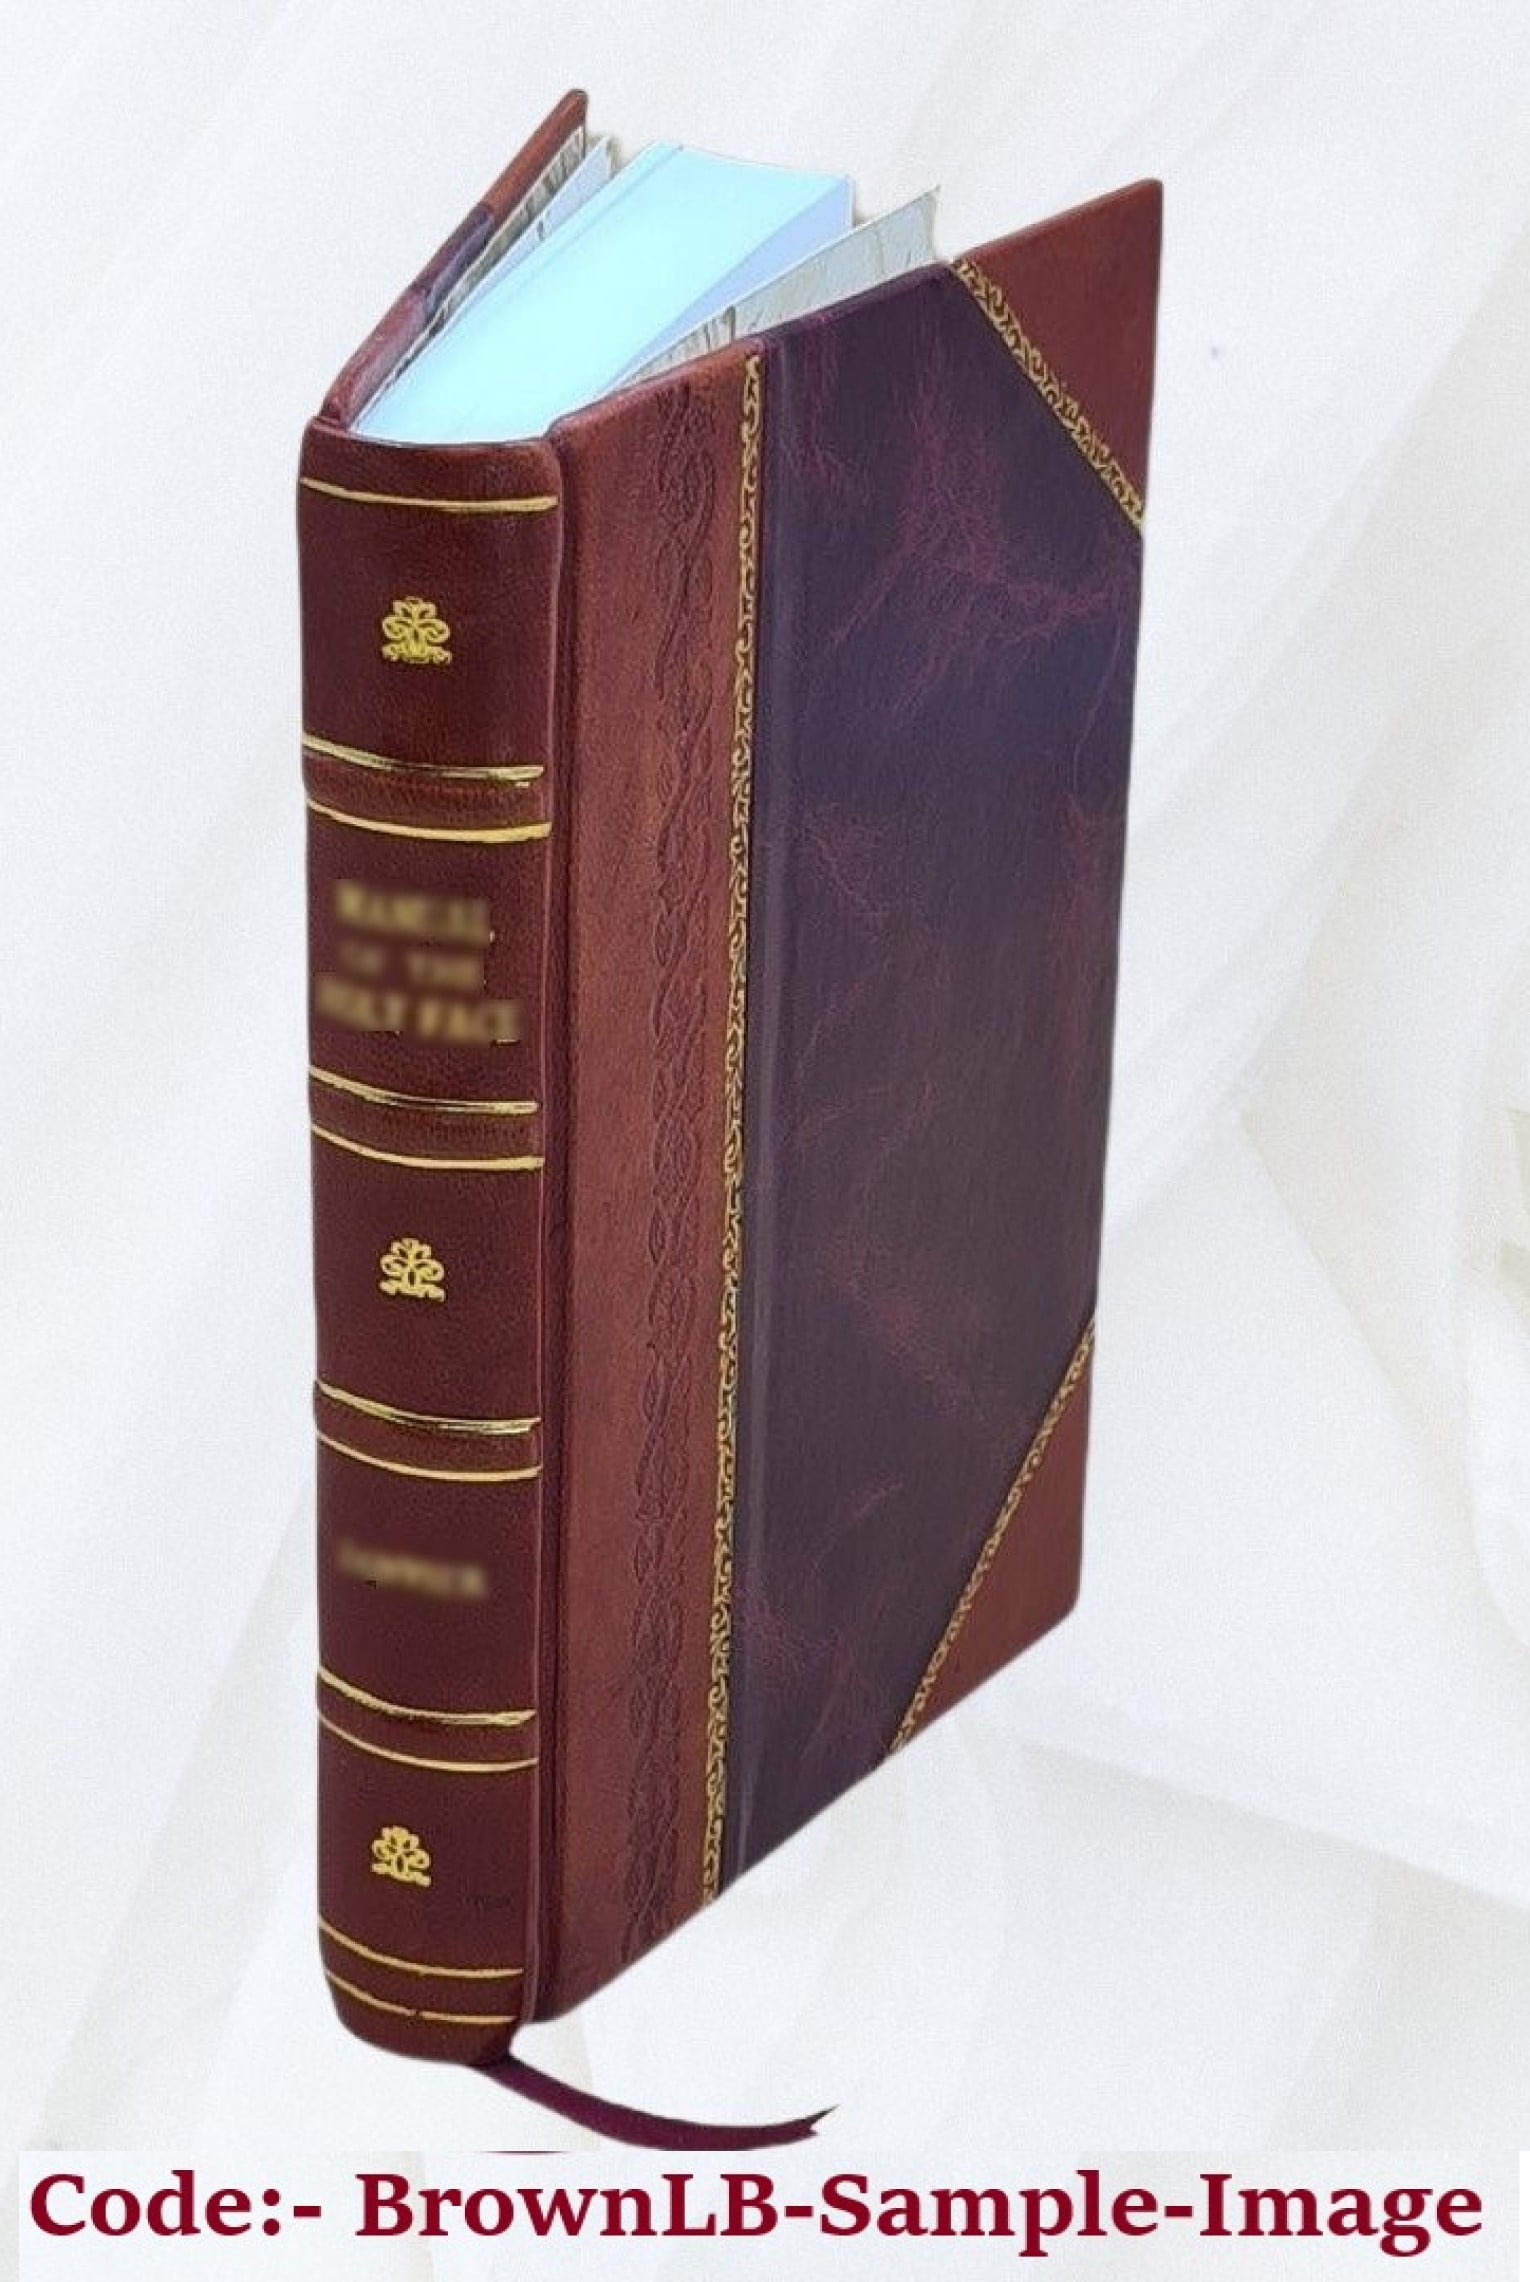 Journal_Of_The Royal Horticultural Society Vol-LV 1930 1930 [Leather Bound]  